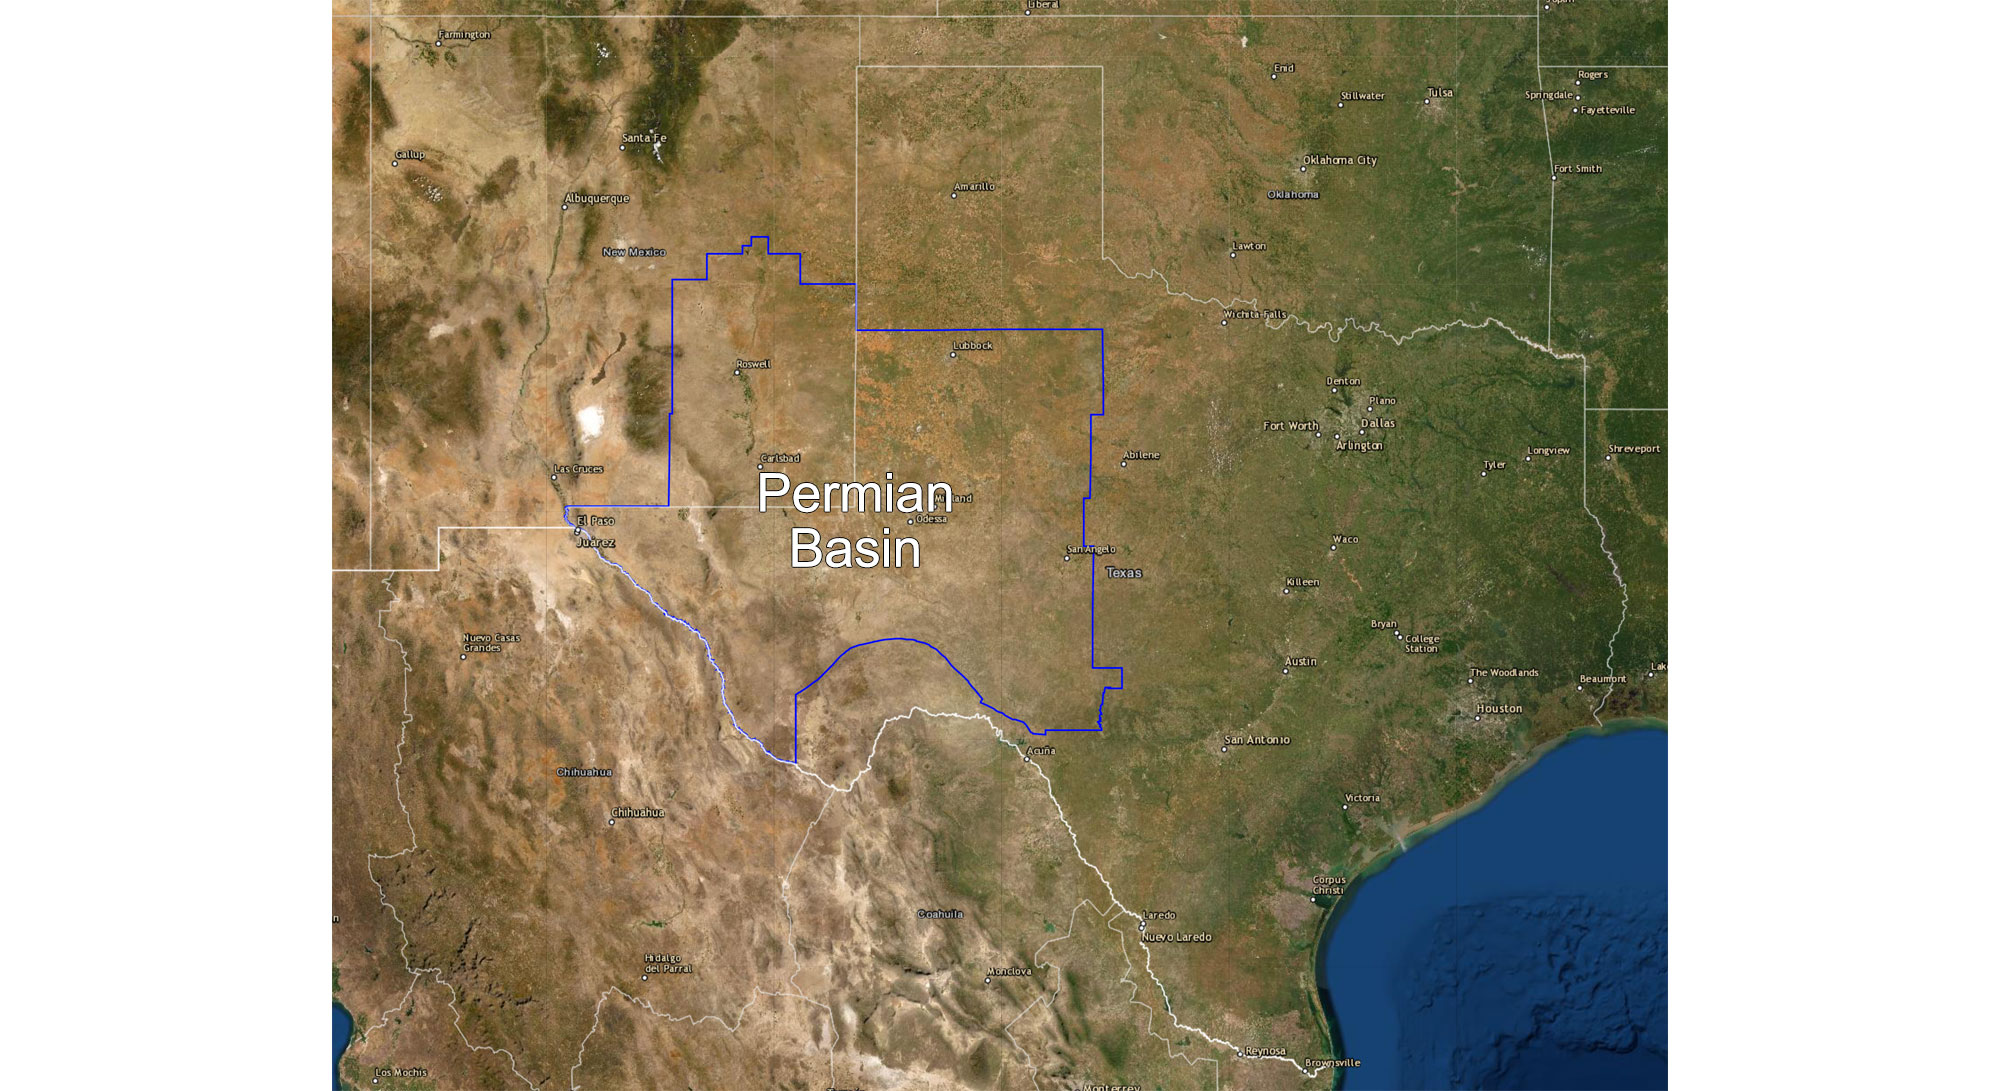 Image showing Texas, New Mexico, and Oklahoma made from satellite photos with the boundaries of the Permian Basin in western Texas and southeastern New Mexico outlined in blue.